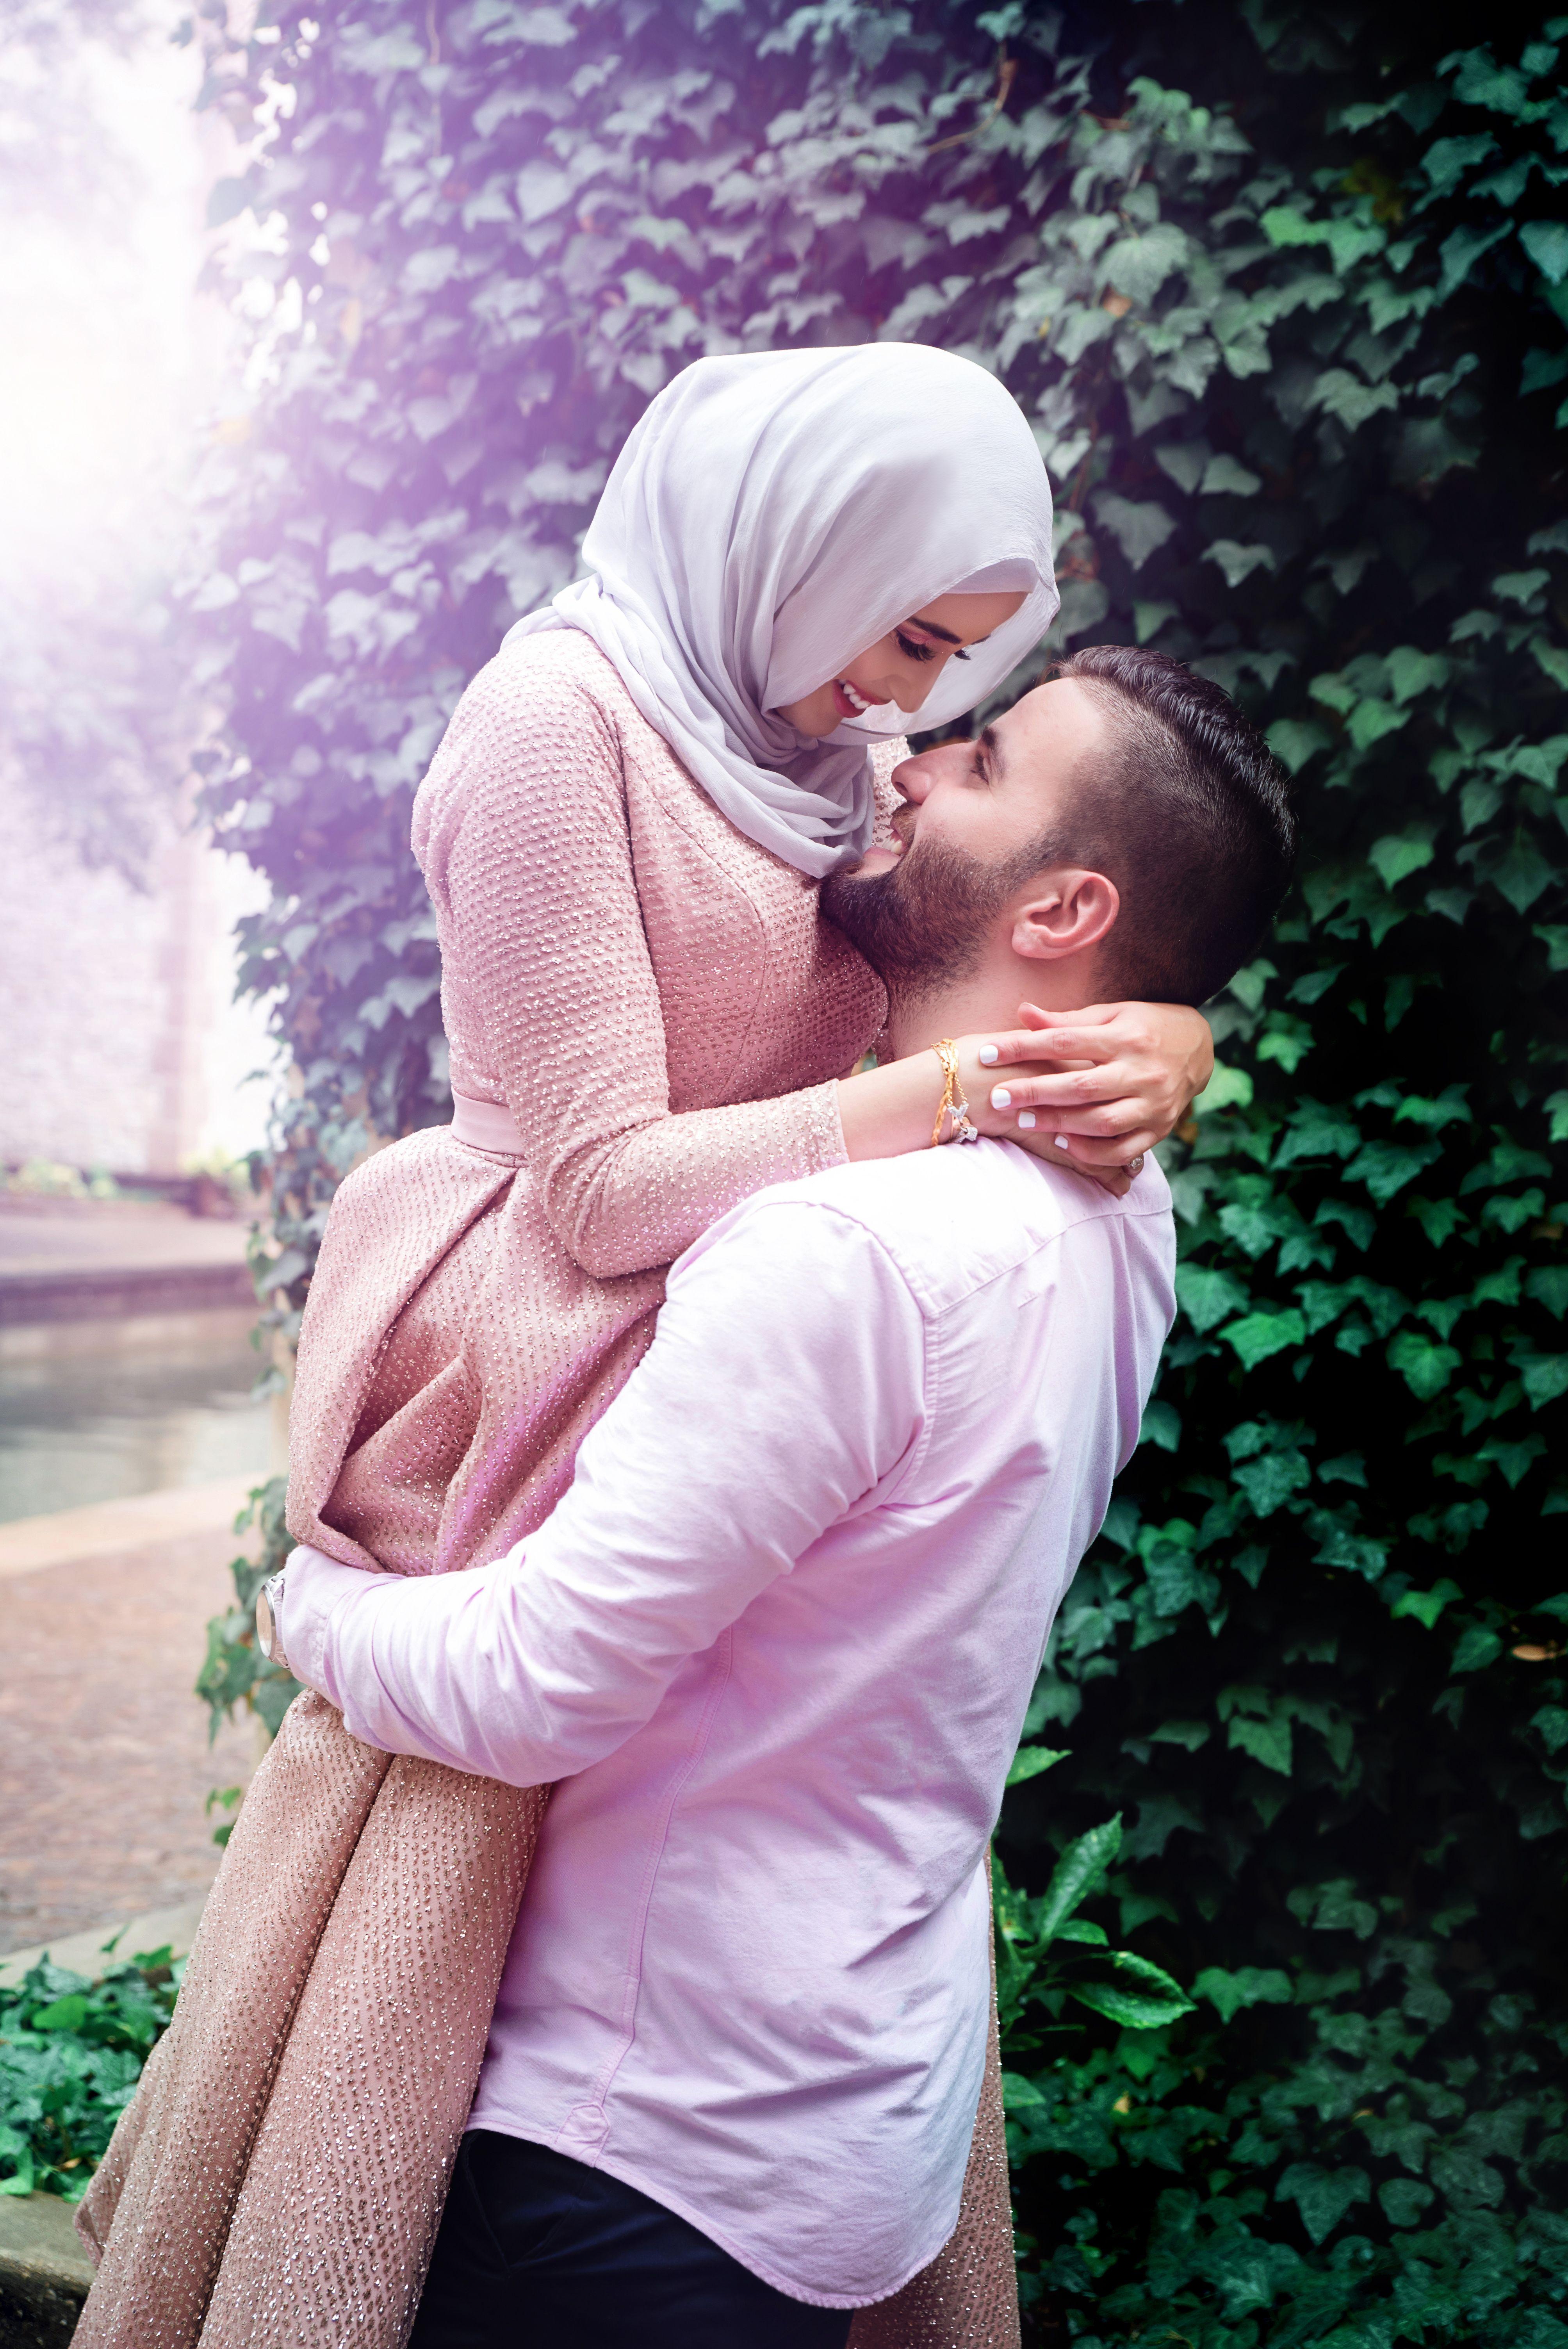 Beautiful simple engagement session for a young Muslim